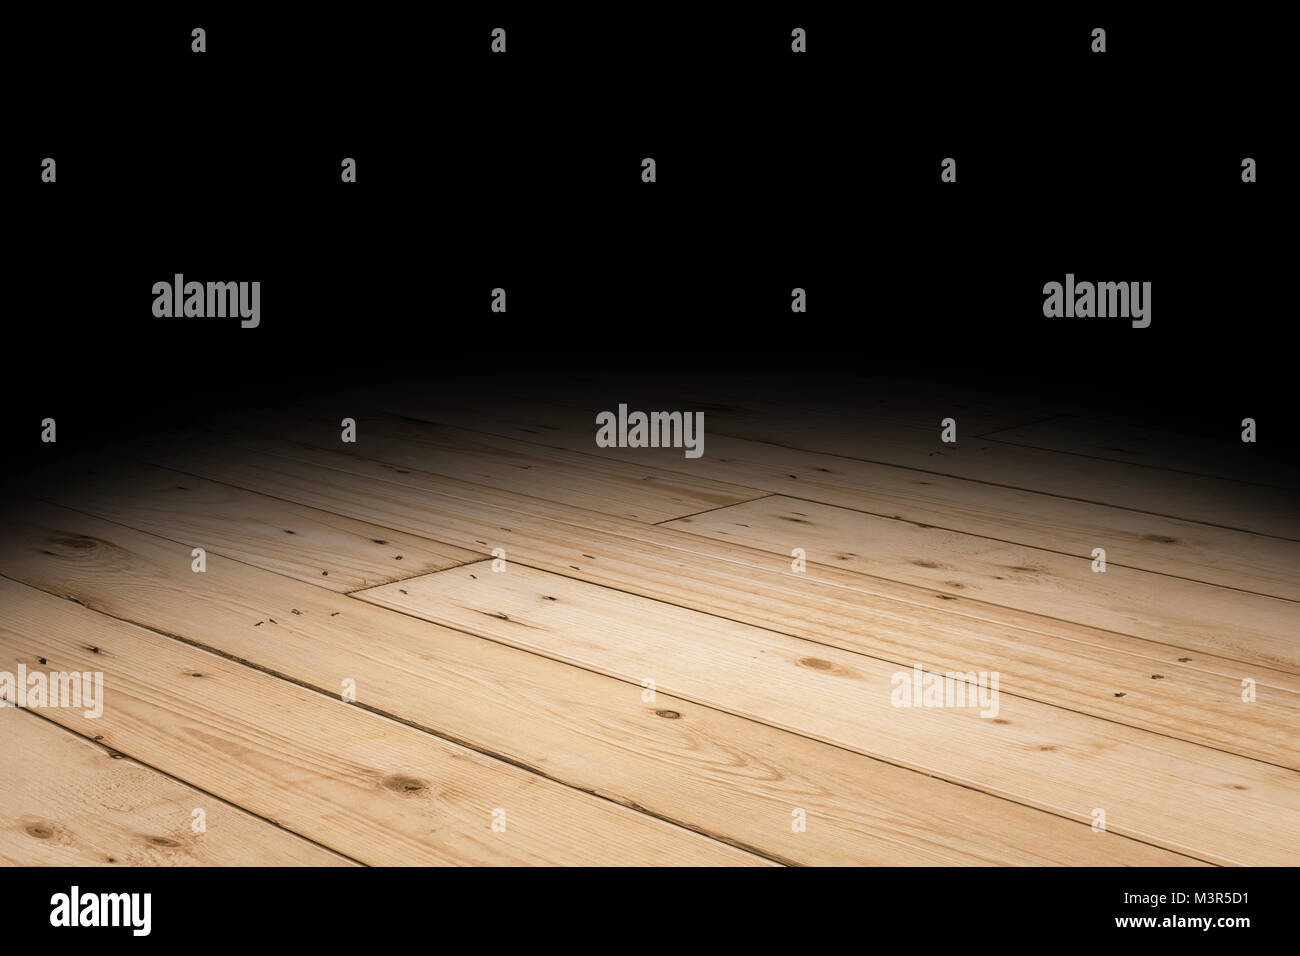 Plank wood floor texture perspective background for display or montage of product,Mock up template for your design. Stock Photo